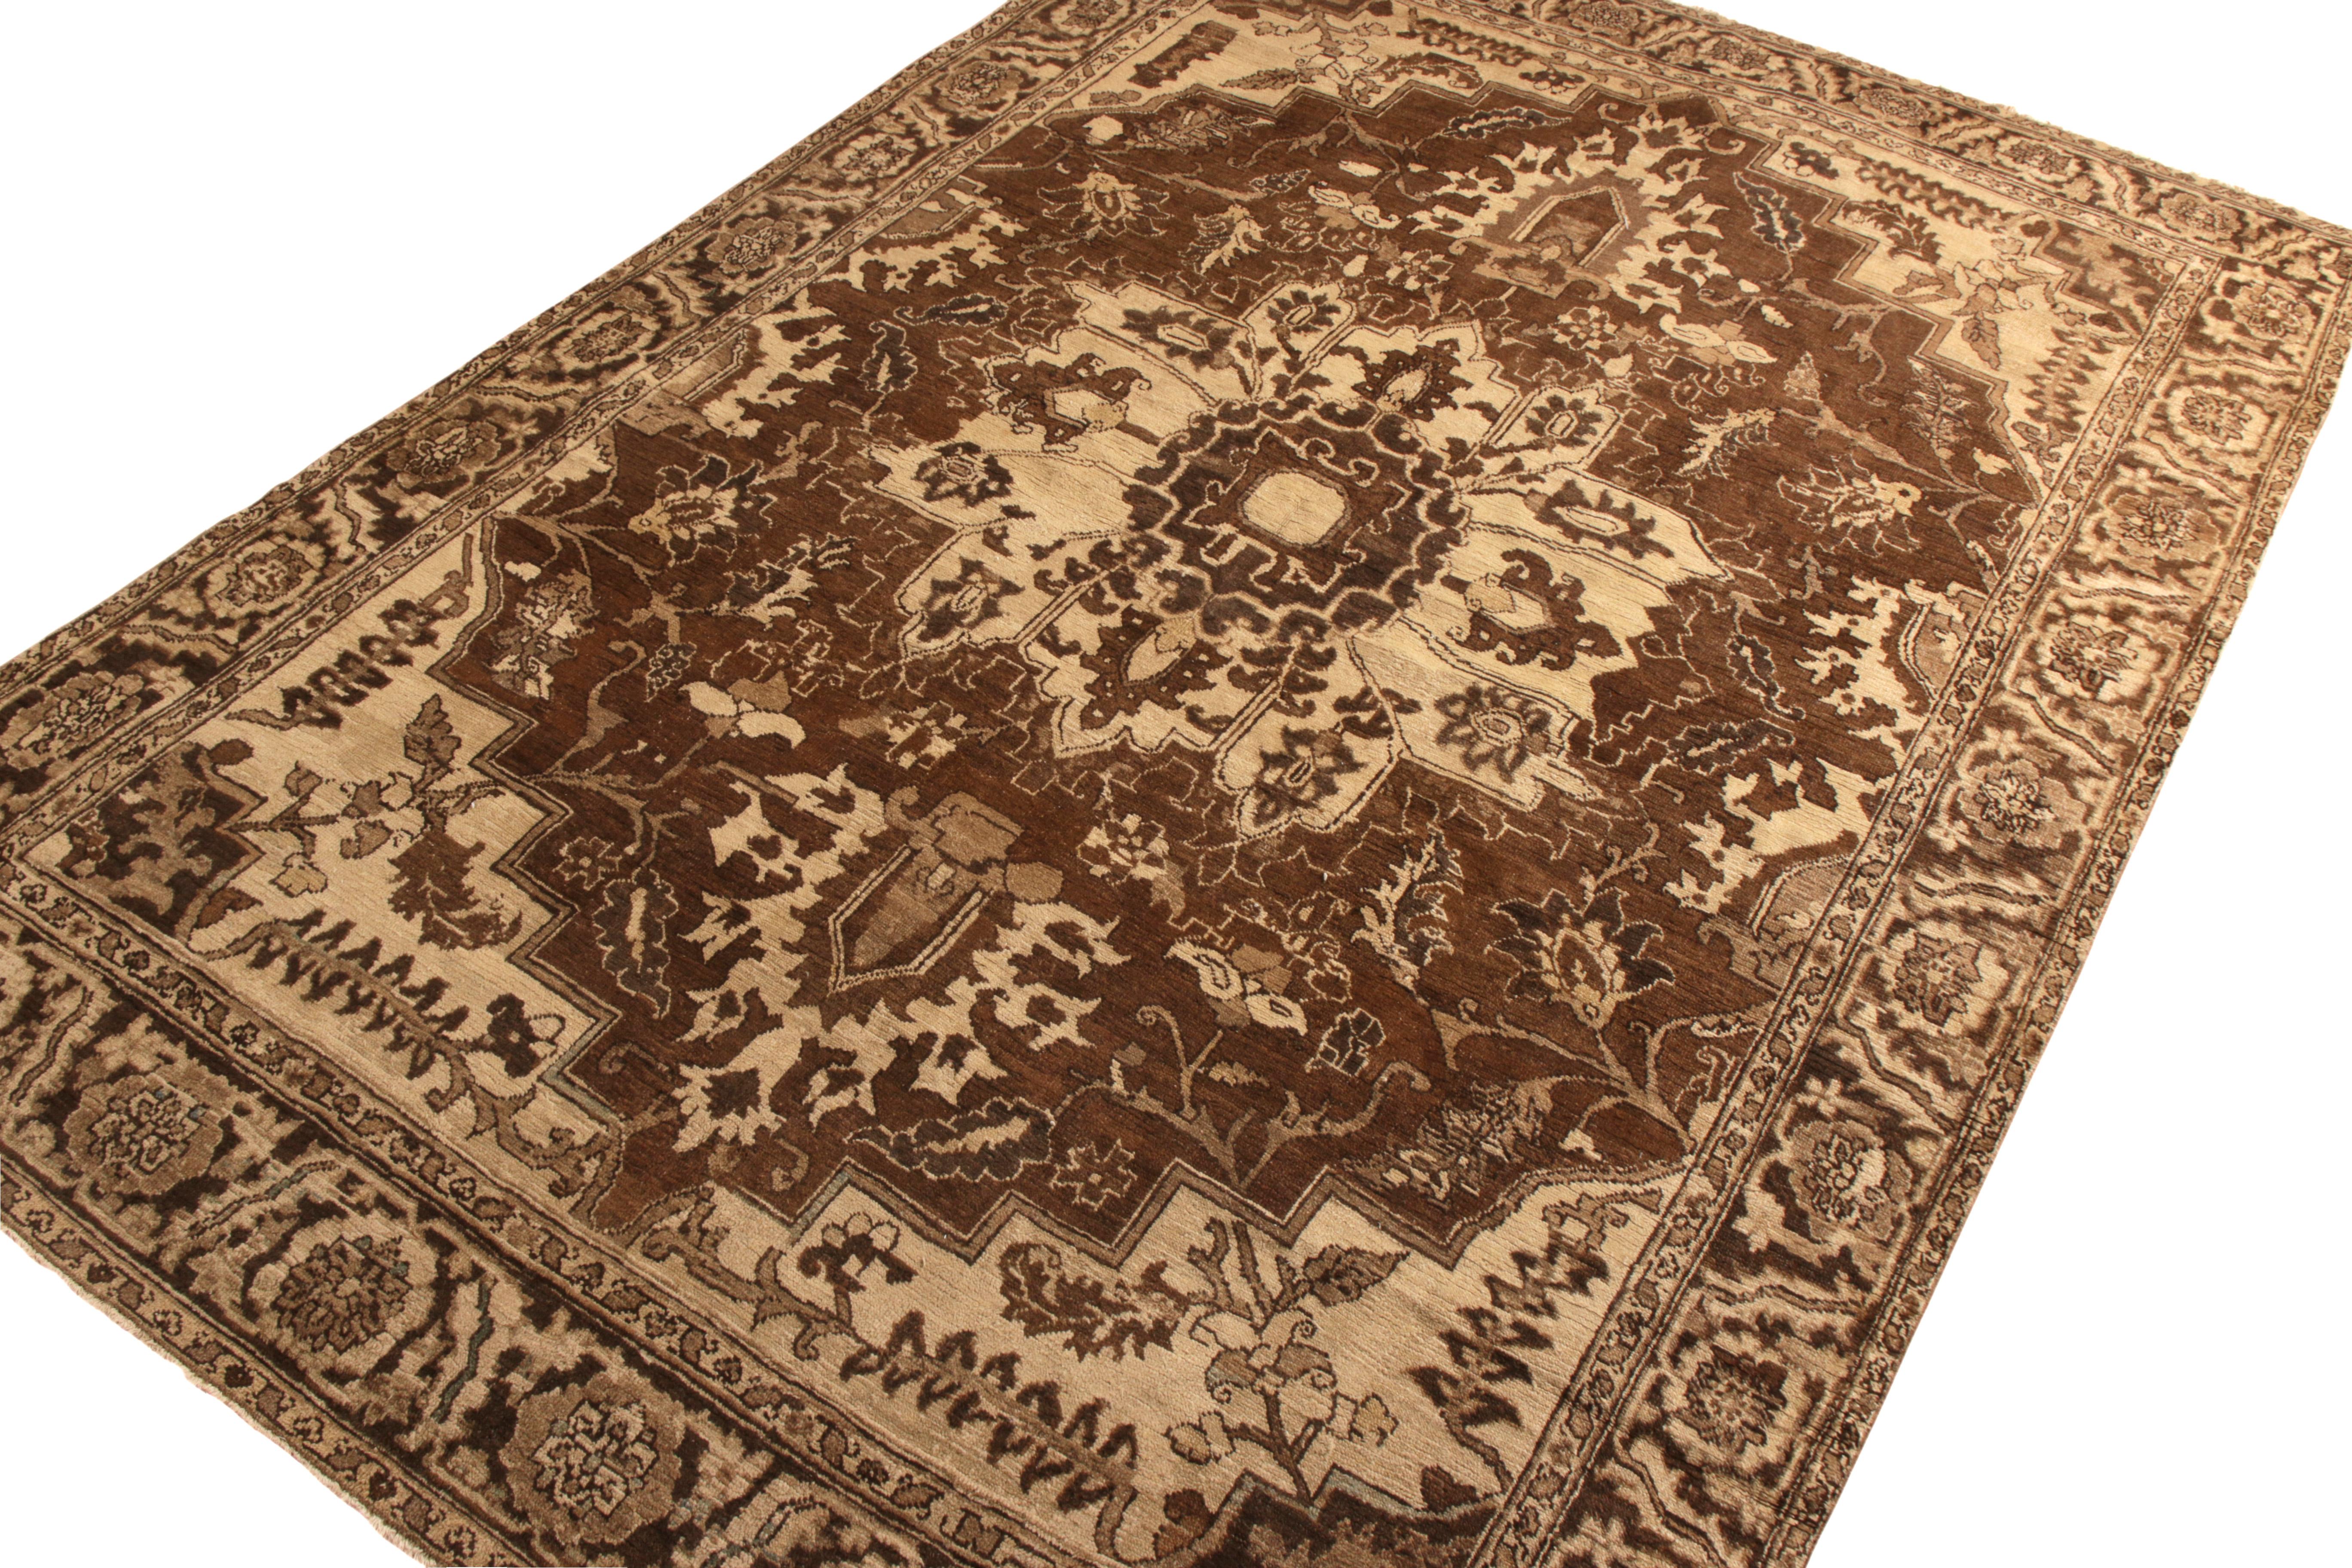 A beautifully rich beige-brown antique Persian Heriz rug joining Rug & Kilim’s Antique & Vintage collection. Hand knotted in wool circa 1920-1930, the rug witnesses a blissful marriage of beautiful rich floral and medallion style, sitting with a